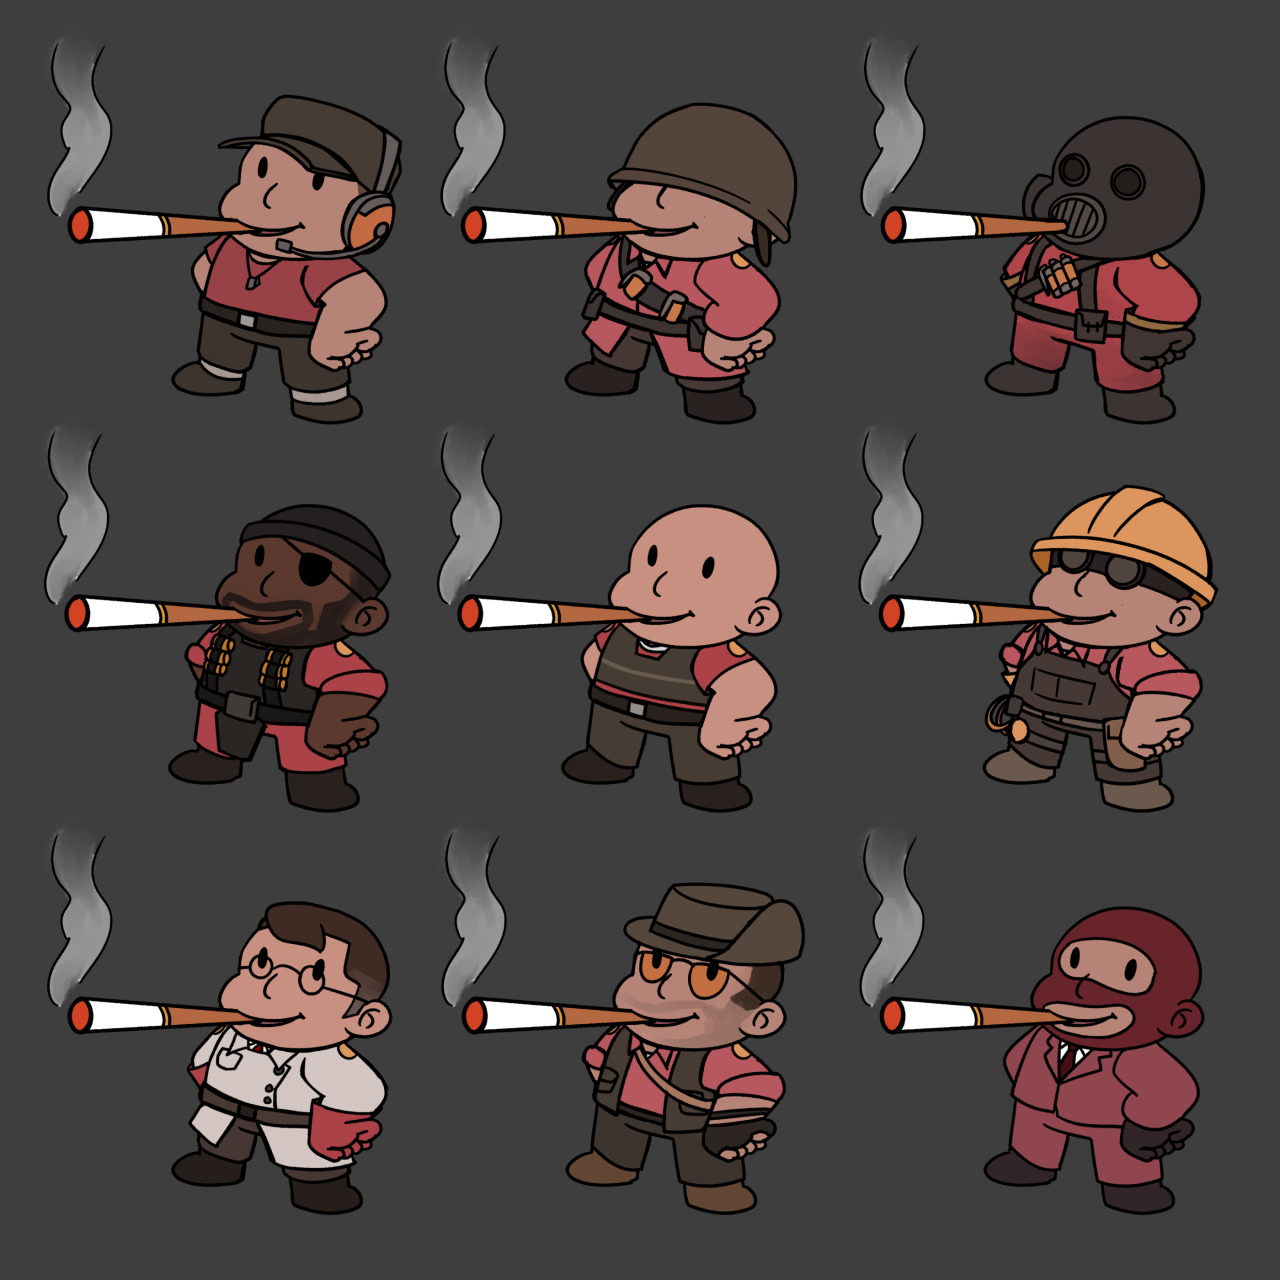 no idea what these mercs are but they are chuffin back a fat dart and thats all that matters!!! #tf2 #team fortress 2  #+ transparent version if you wanna use them as emotes or smthn just credit me! #tf2 scout#tf2 soldier#tf2 pilot#tf2 demoknight#tf2 heavy#tf2 engineer#tf2 medic#tf2 sniper#tf2 spy #i cant believe i spent time on this #fanart